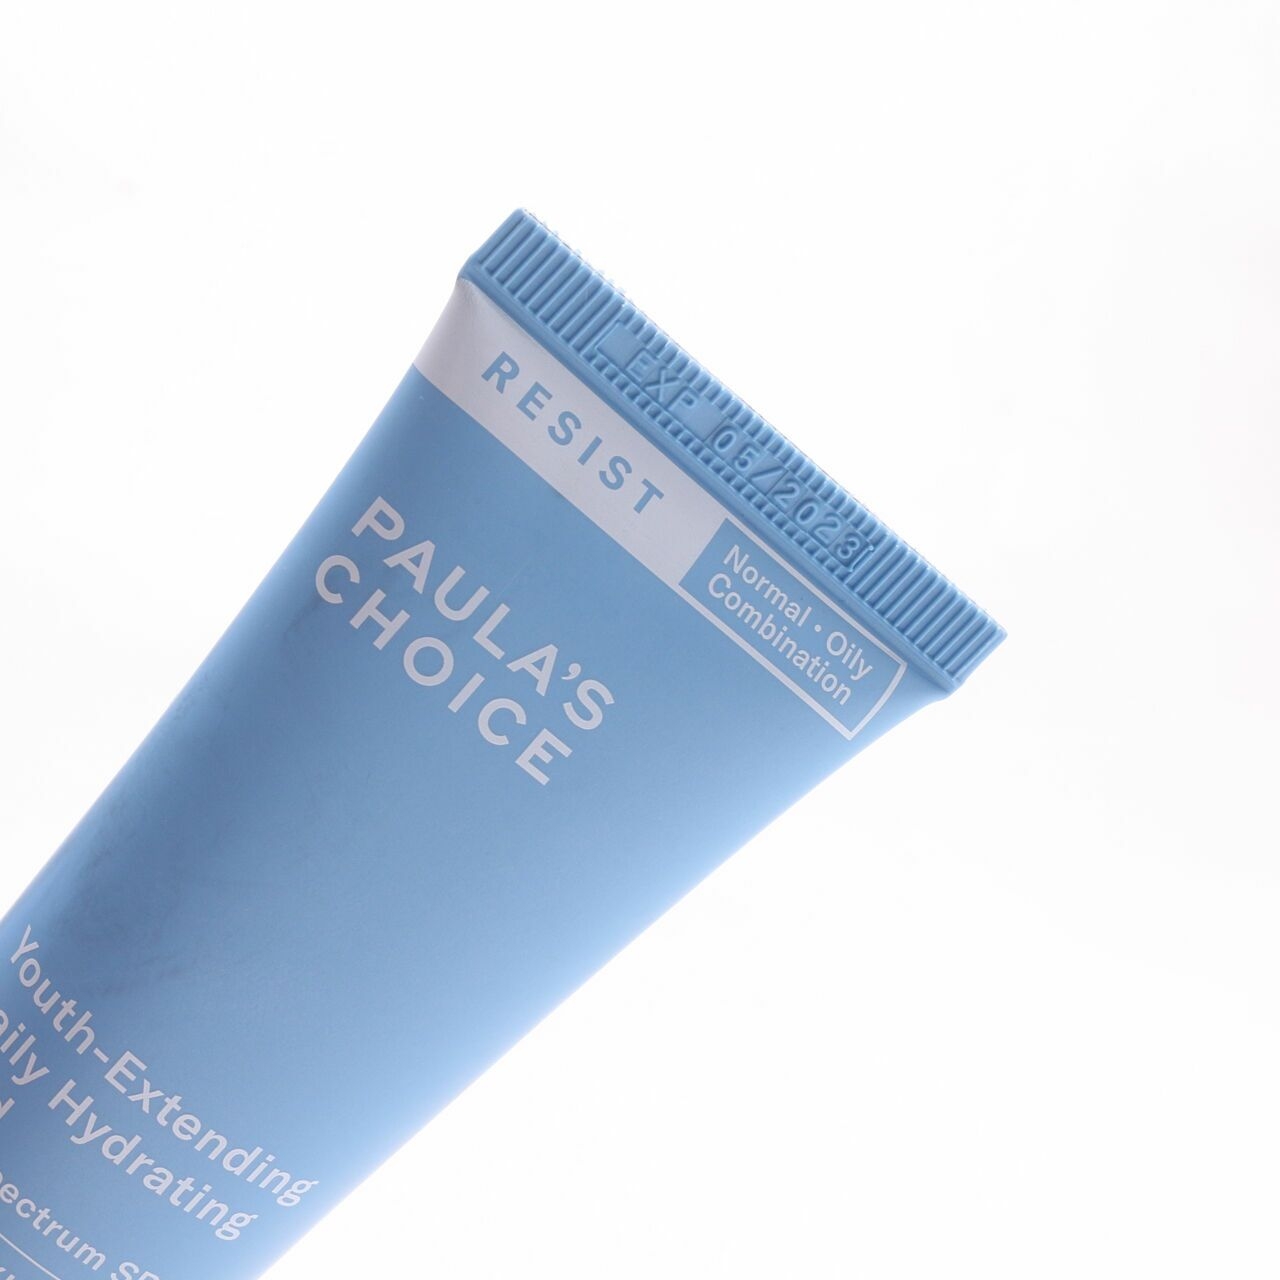 Paula's Choice Resist Youth Extending Daily Hydrating Fluid SPF 50 Skin Care